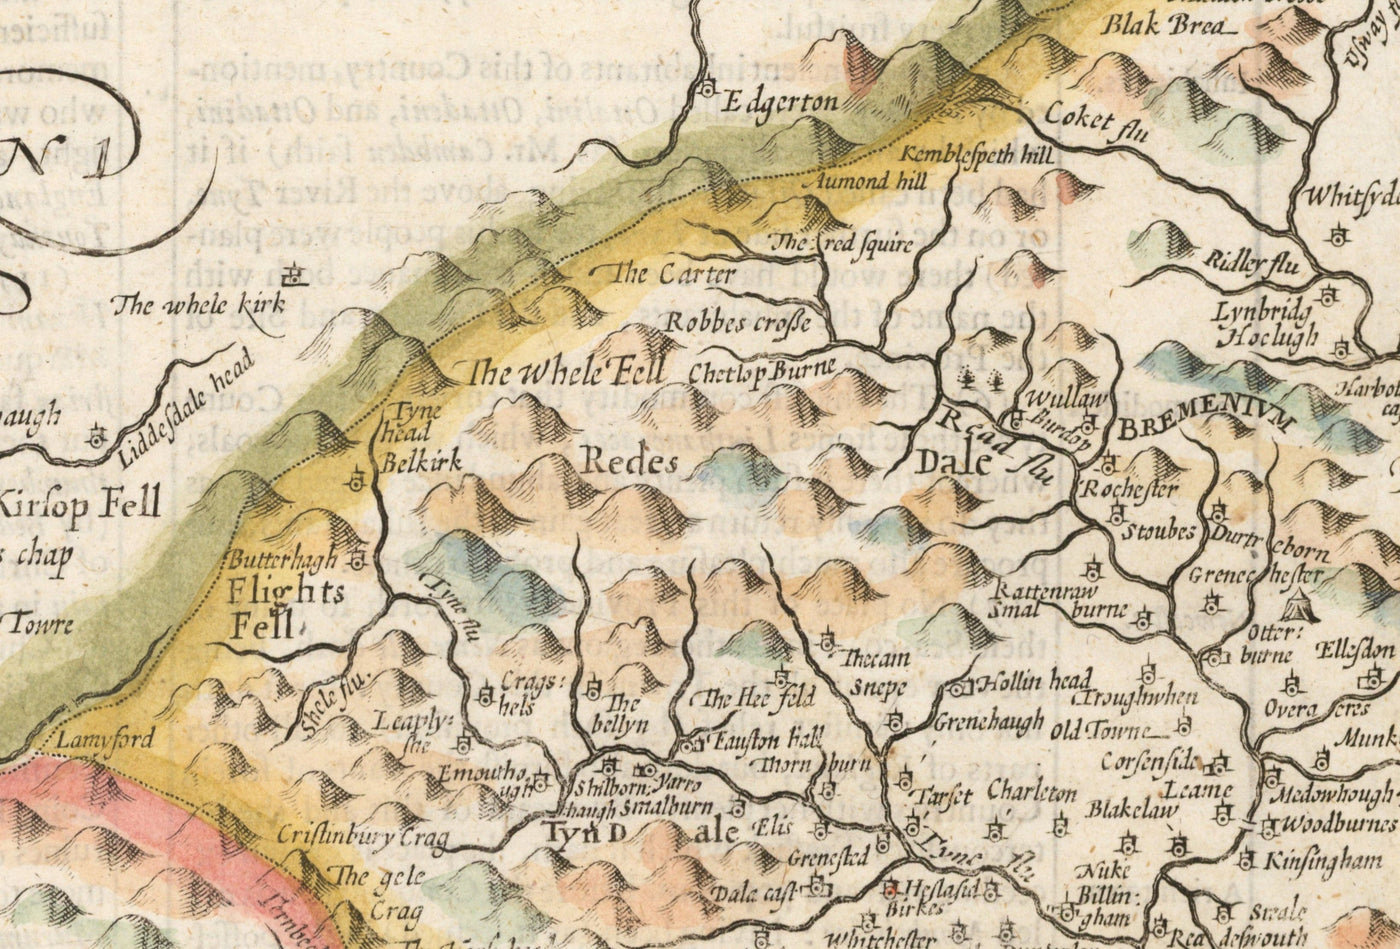 Old Map of Northumberland in 1611 by John Speed - Newcastle, Gateshead, Hadrian's Wall, Tyne and Wear